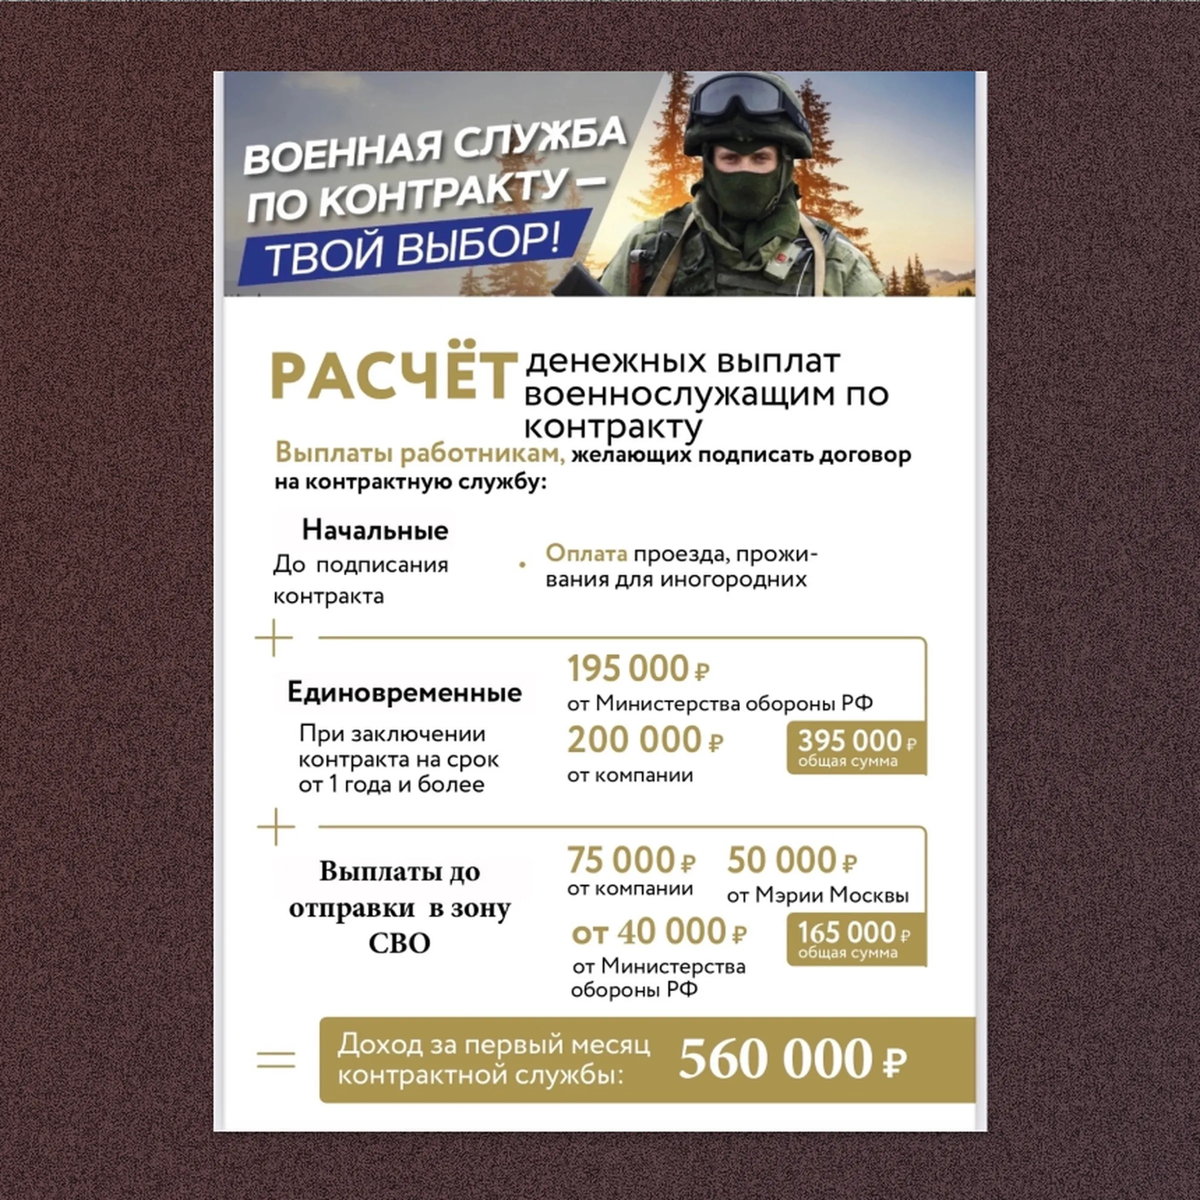 Mashprom is not stingy — in April it offered servicemen 560,000 rubles...